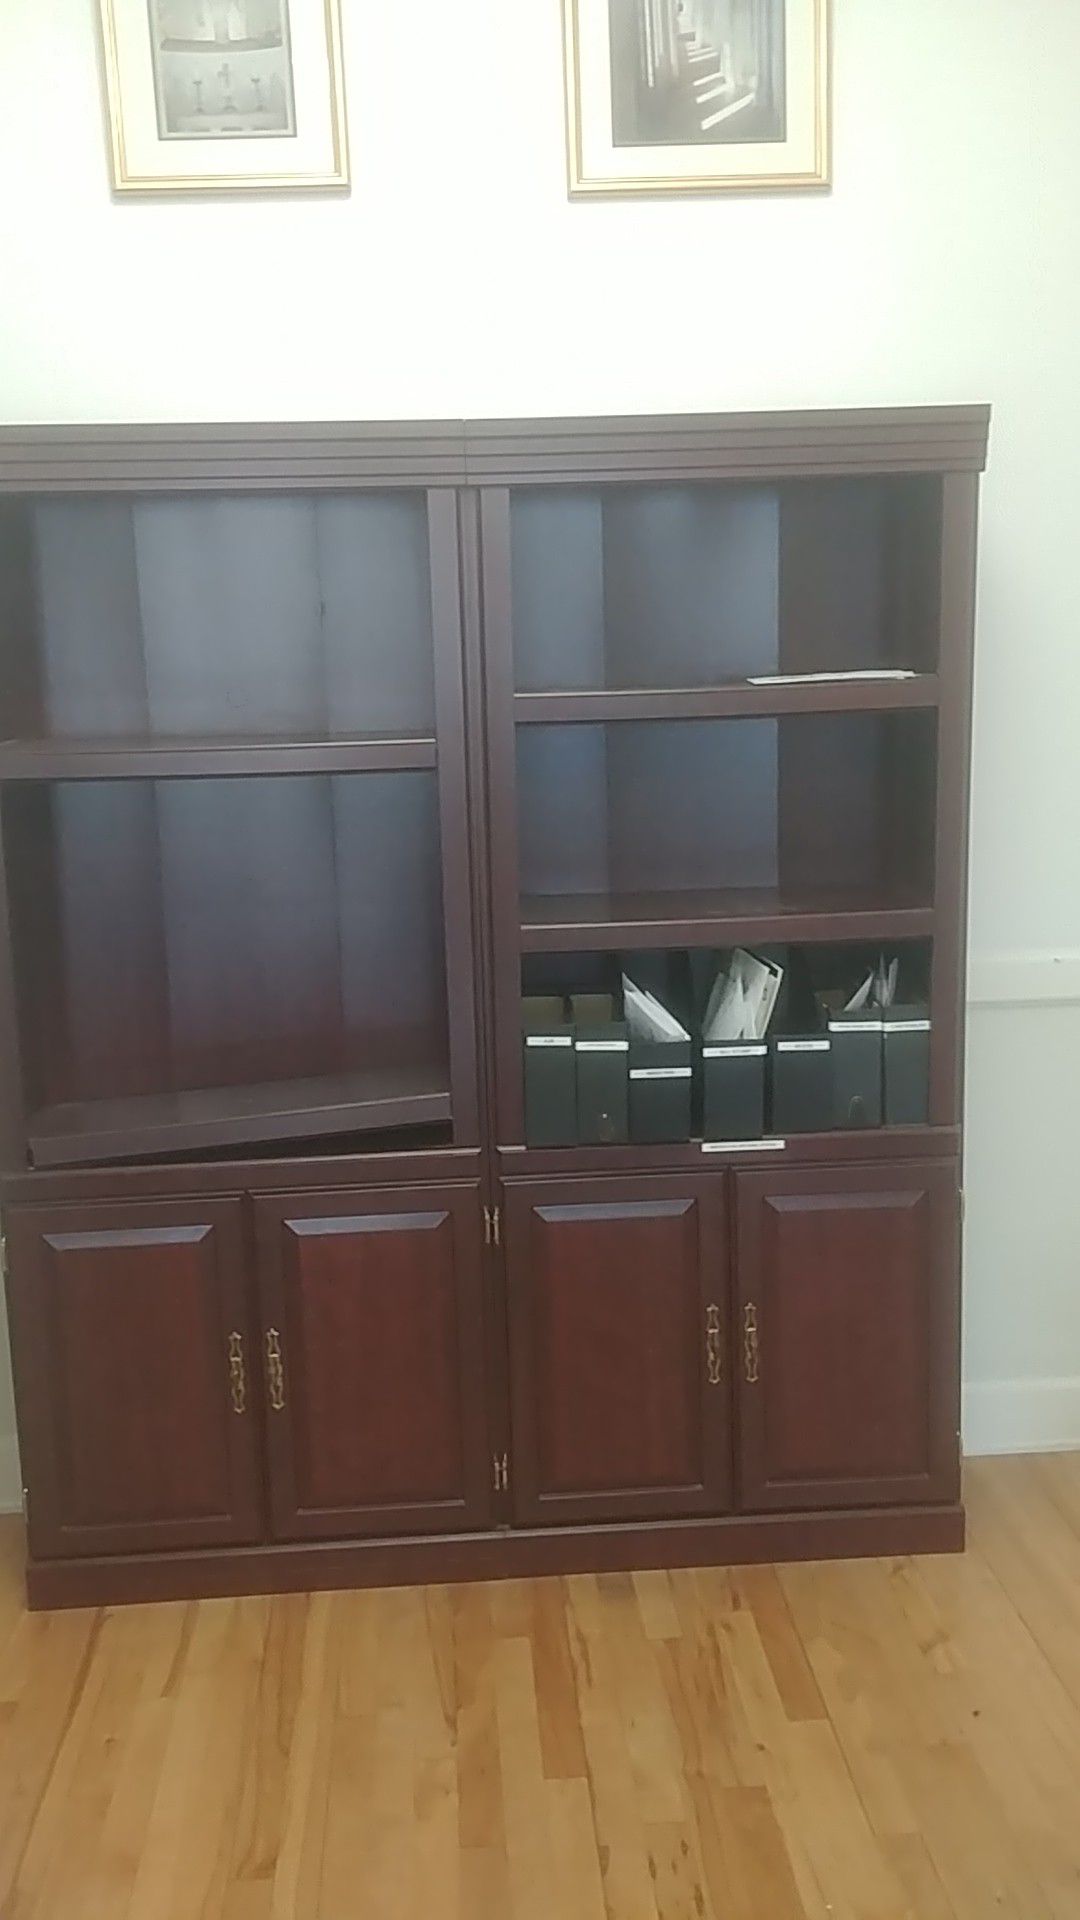 Bookshelves and cabinet